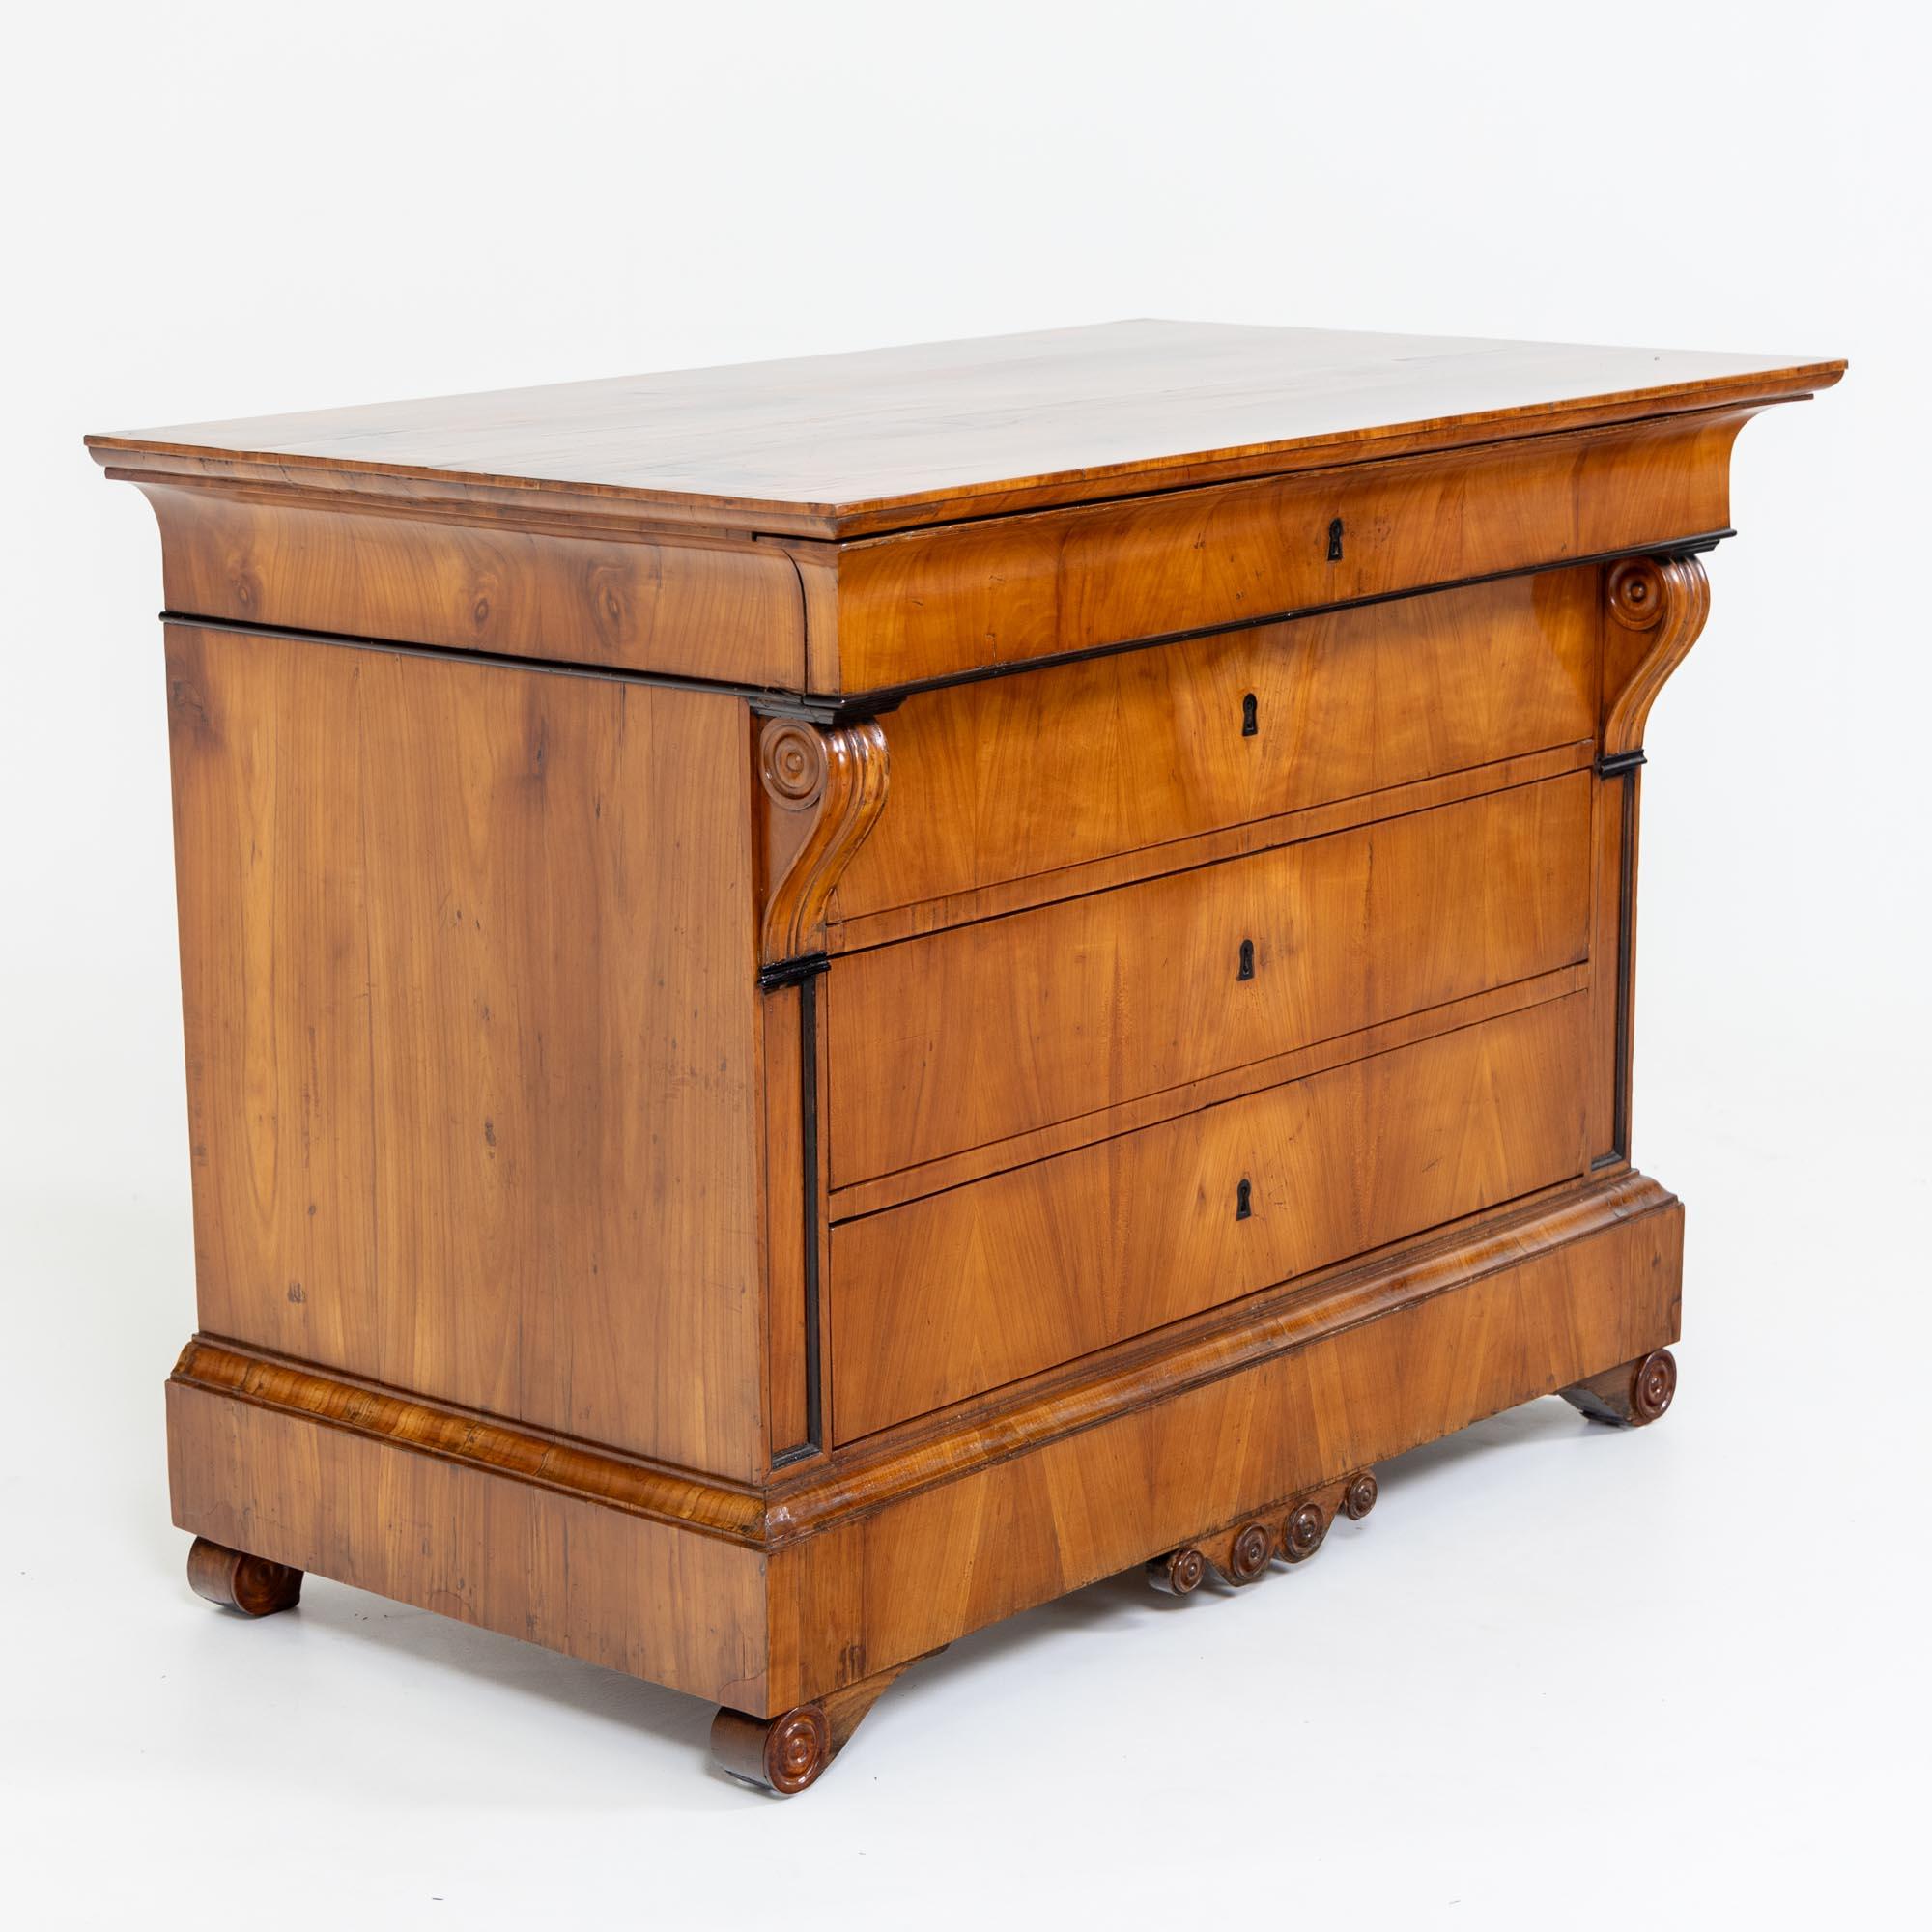 Mid-19th Century Biedermeier Chest of Drawers, polished Cherry veneer, four drawers, circa 1830 For Sale